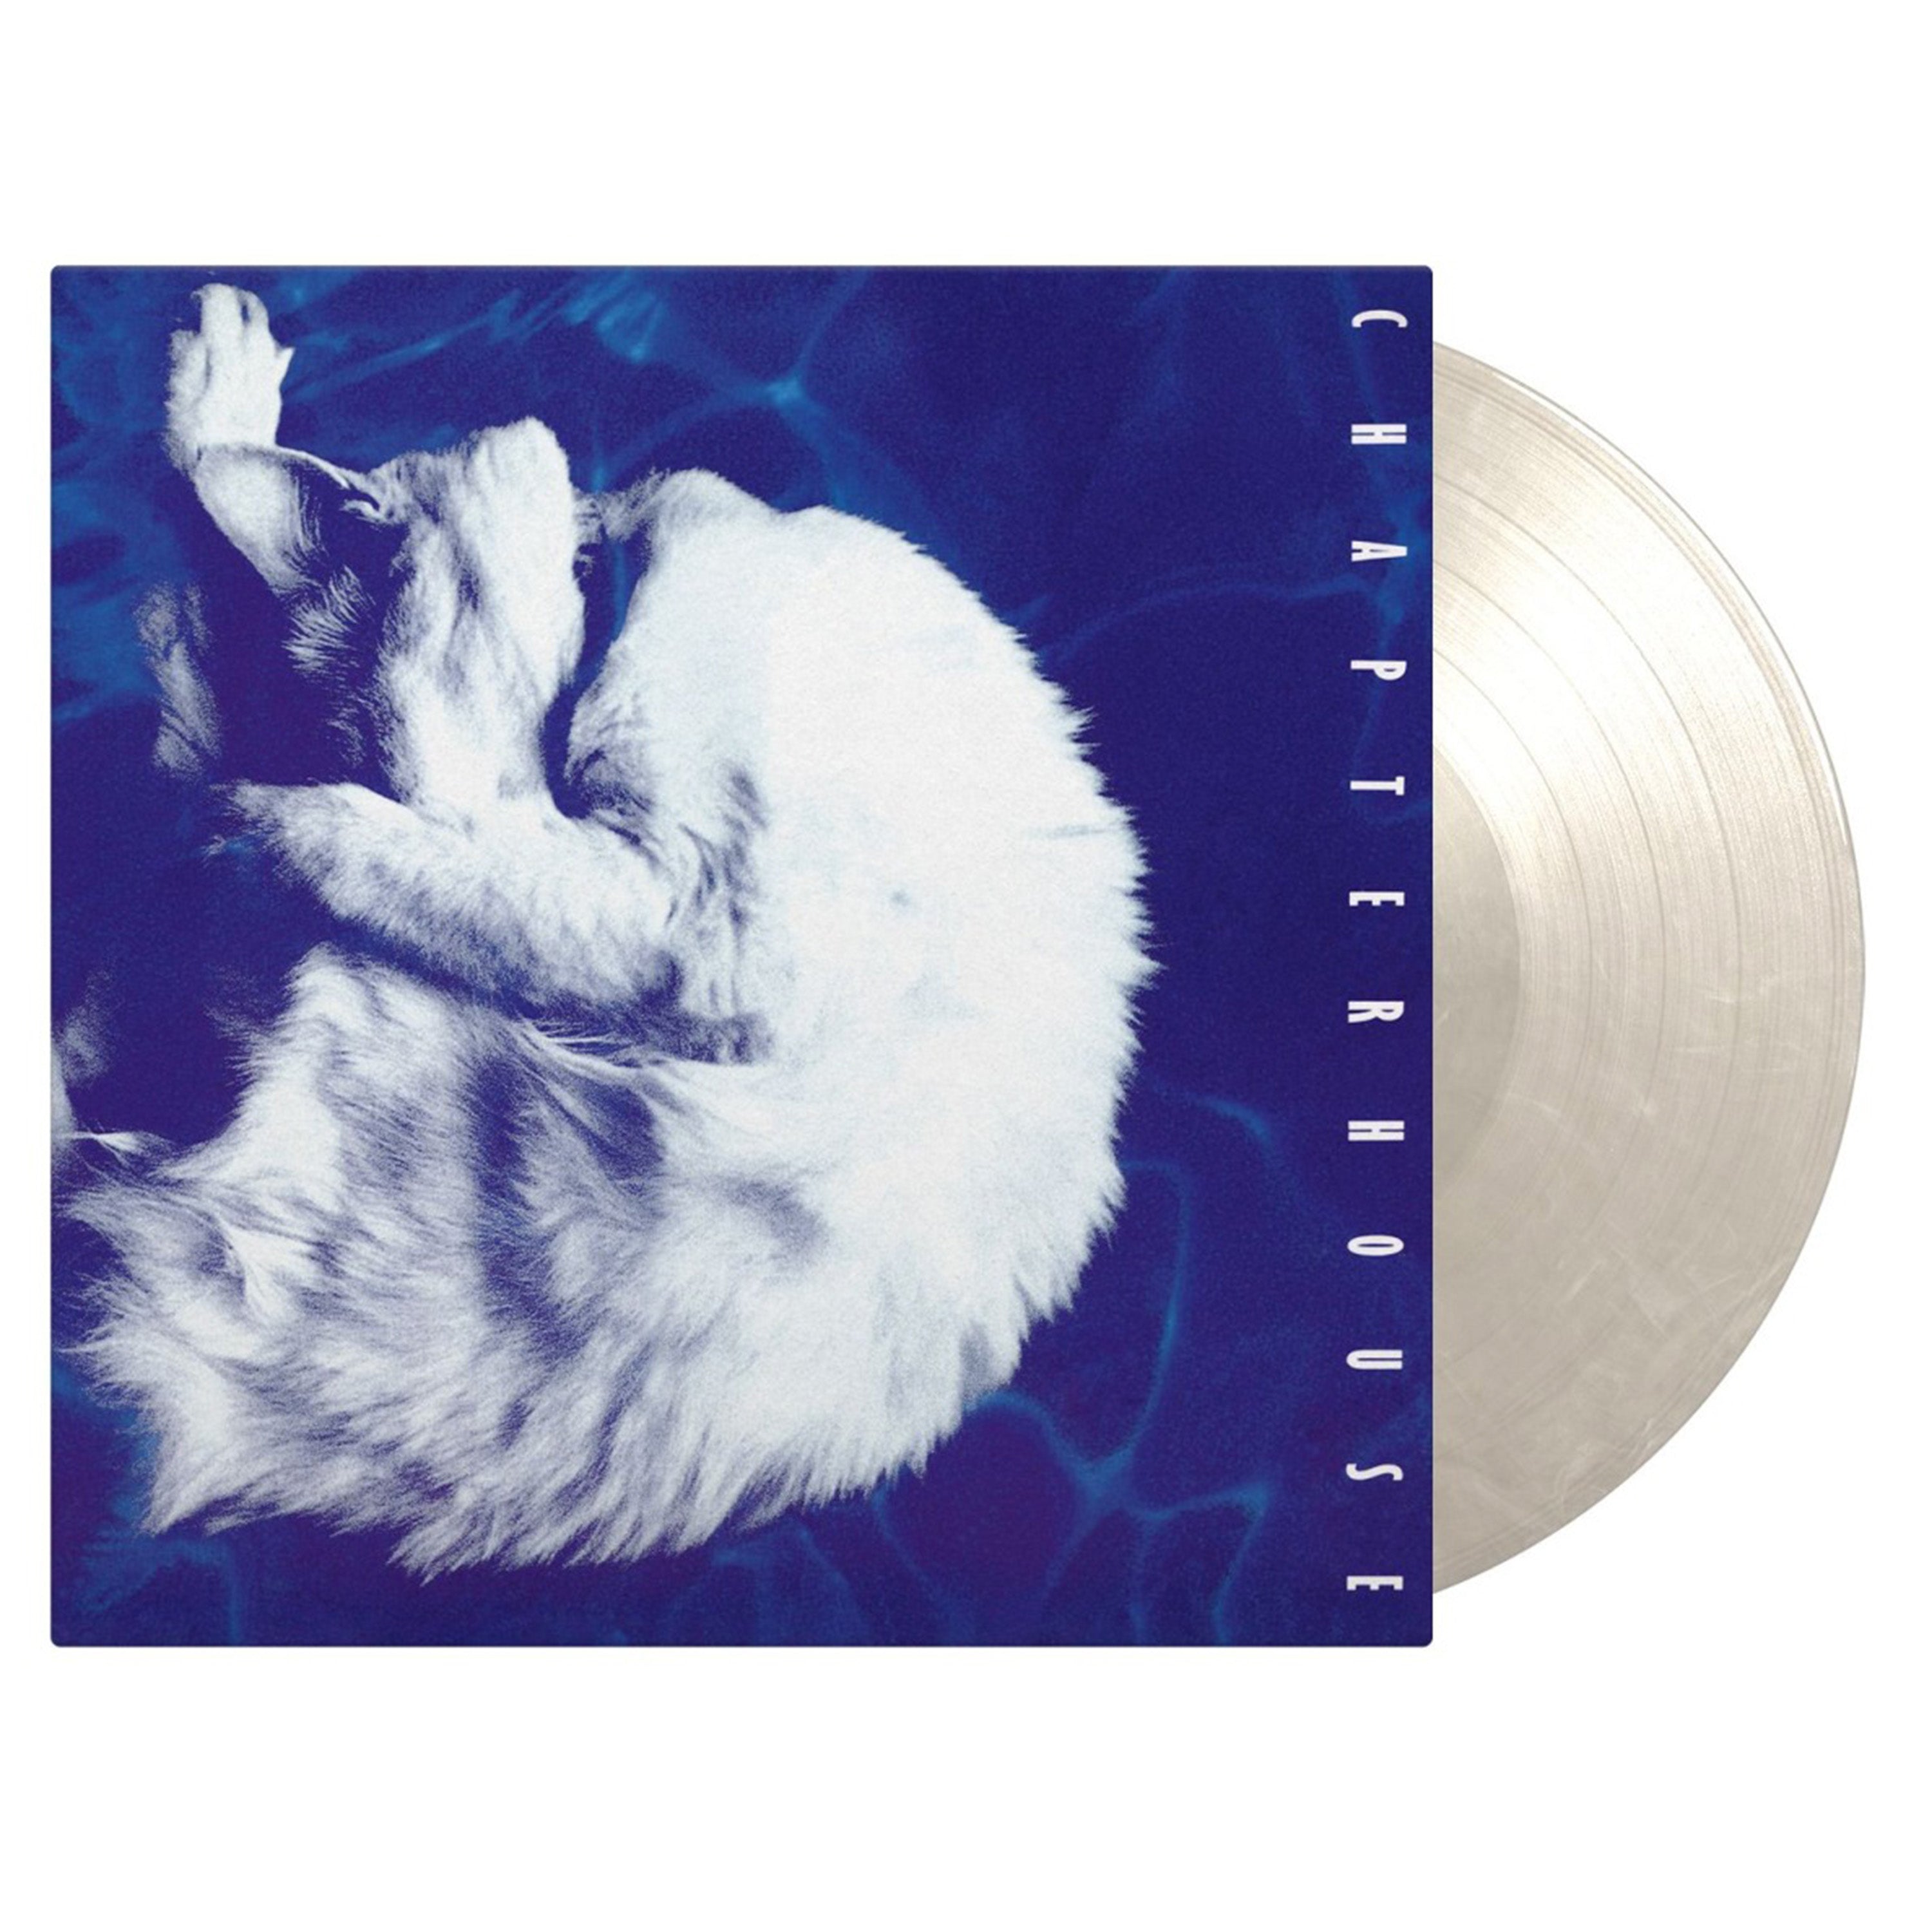 Chapterhouse - Whirlpool: Limited White Marbled Vinyl LP